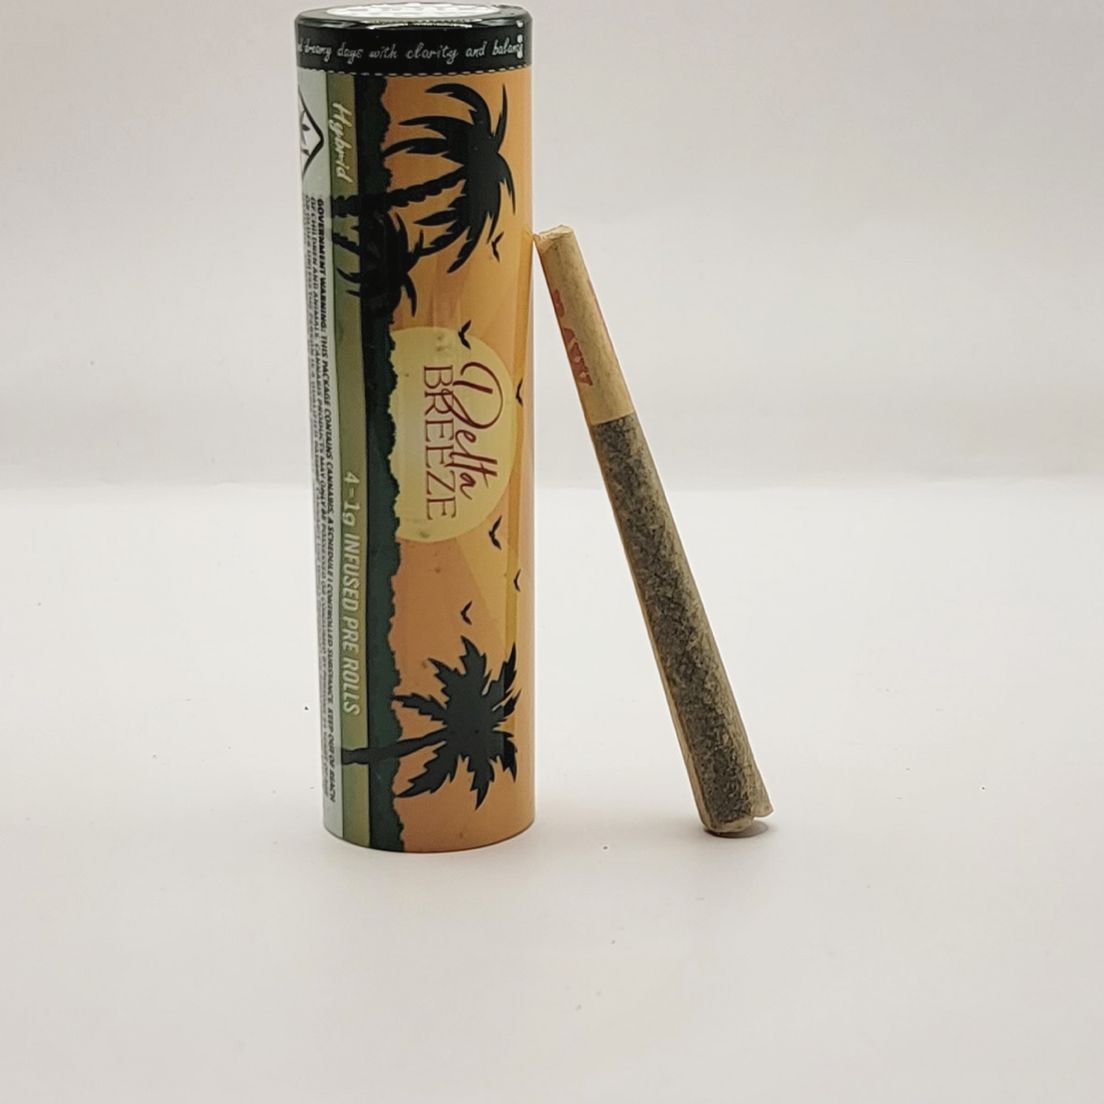 PRE-ORDER ONLY 4g THC Explosion (Hybrid) 4-Pack Diamond Infused Prerolls - Delta Breeze